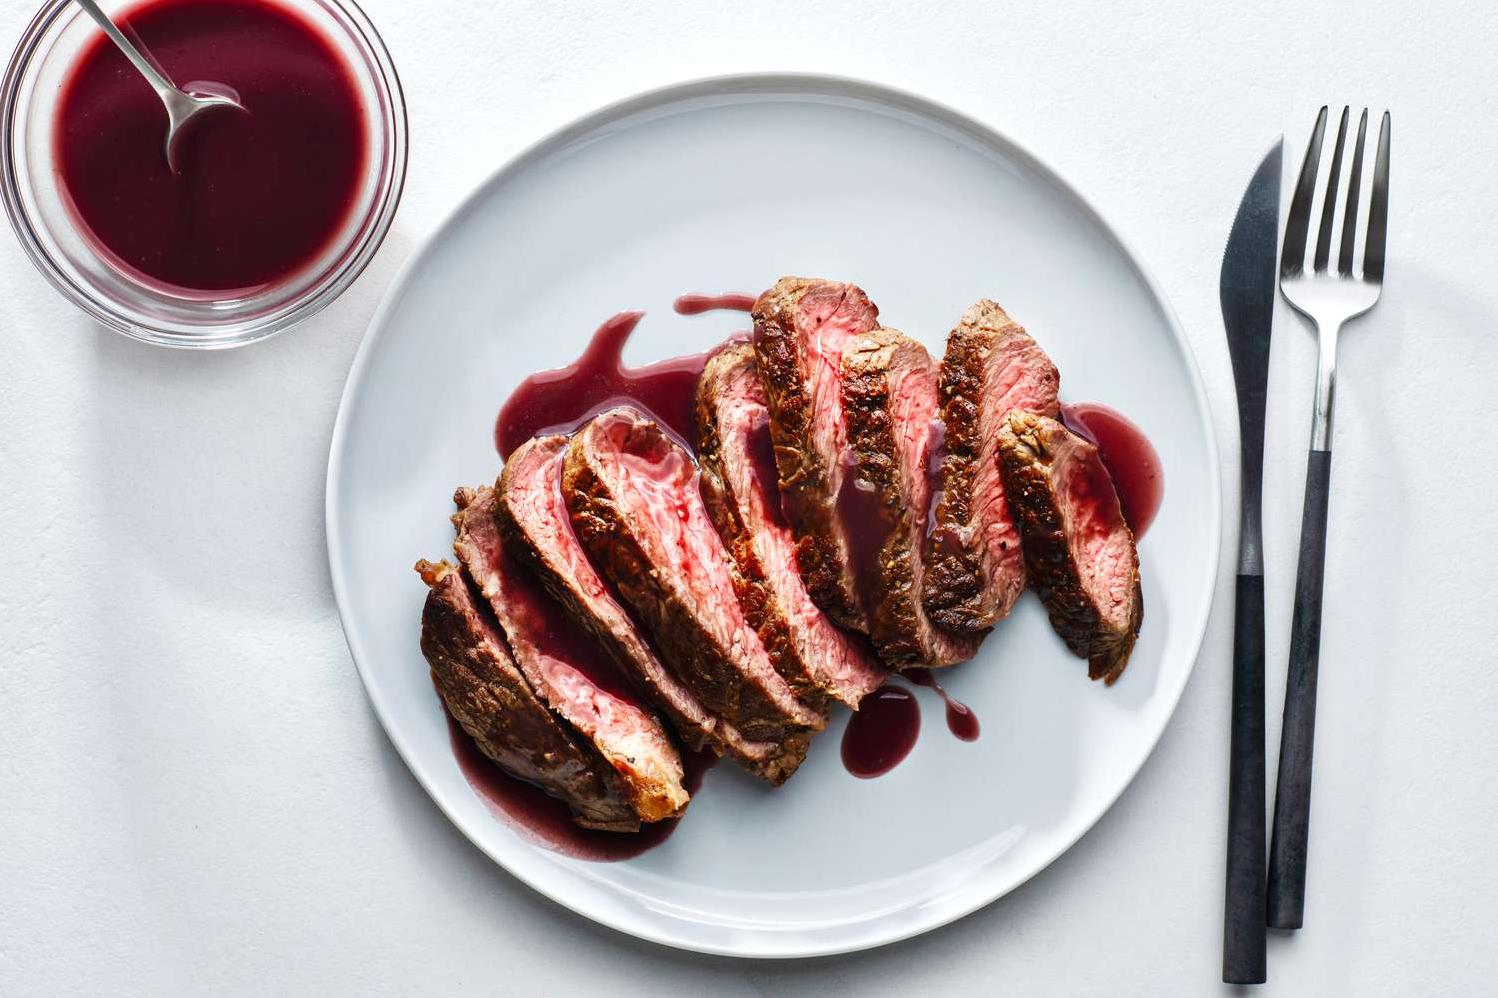  The Cabernet sauce adds a warm, comforting depth to the dish.